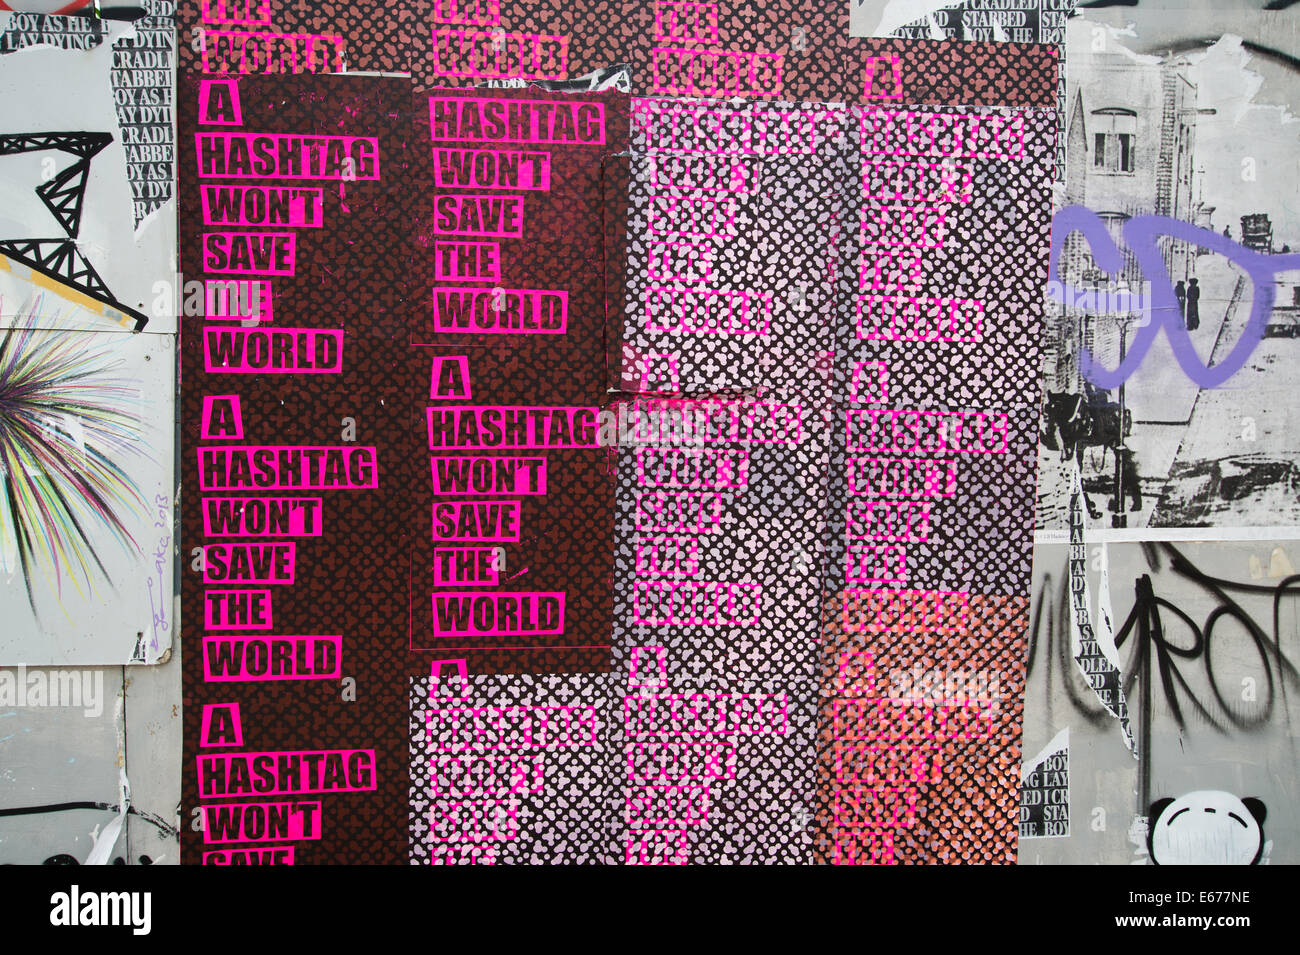 London. Hackney Wick.Street art poster with graphic design of words saying 'A hashtag won't save the world'. Stock Photo